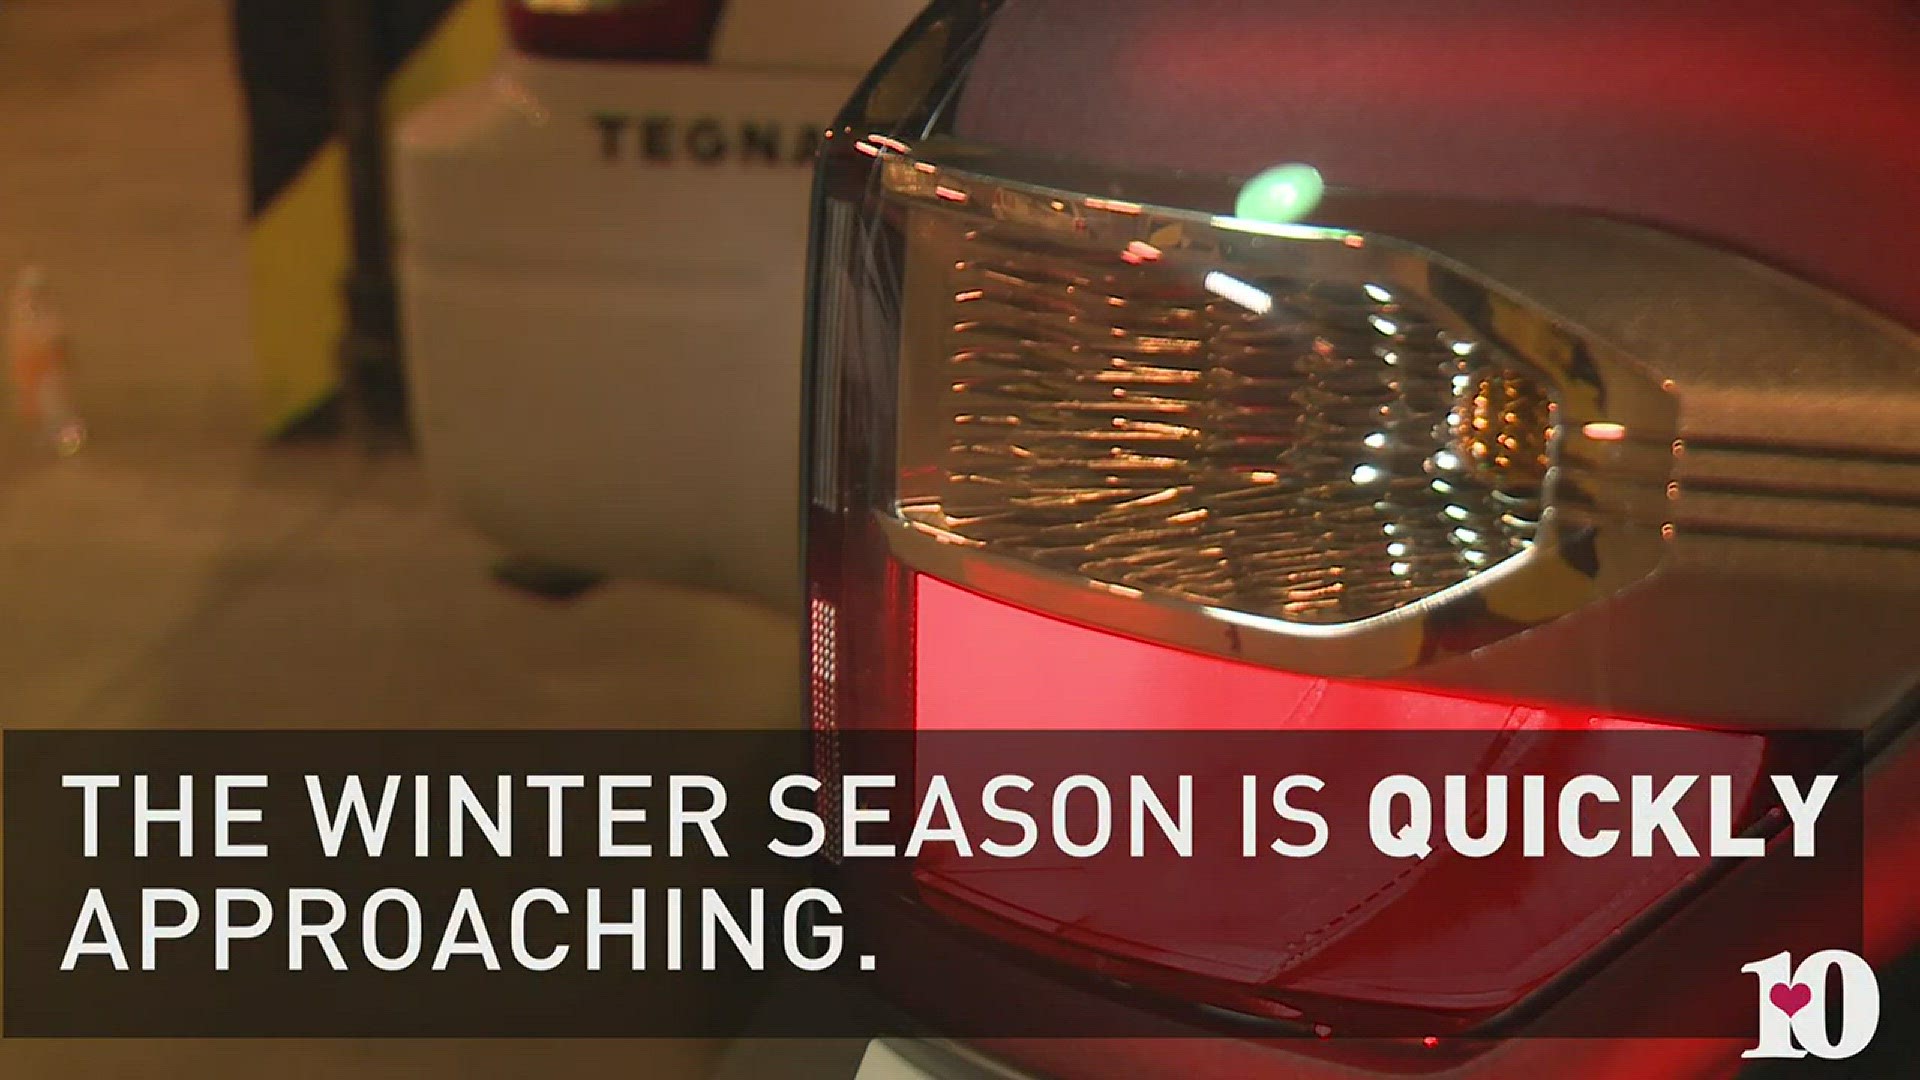 Becca shows you how to stay safe on the roads this winter.